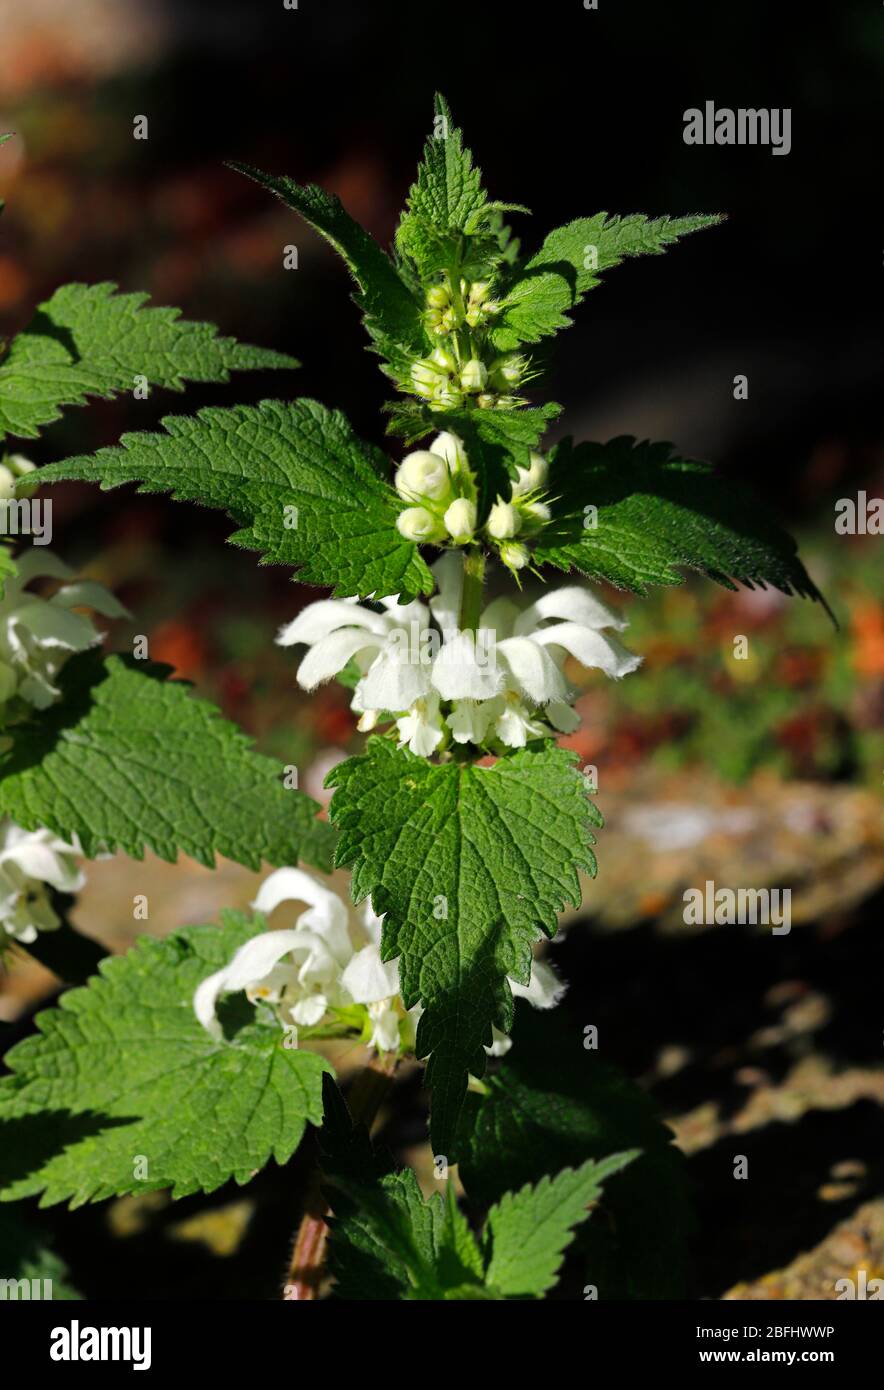 A view of a White Dead-nettle, Lamium album, in a wild patch in an English garden. Stock Photo